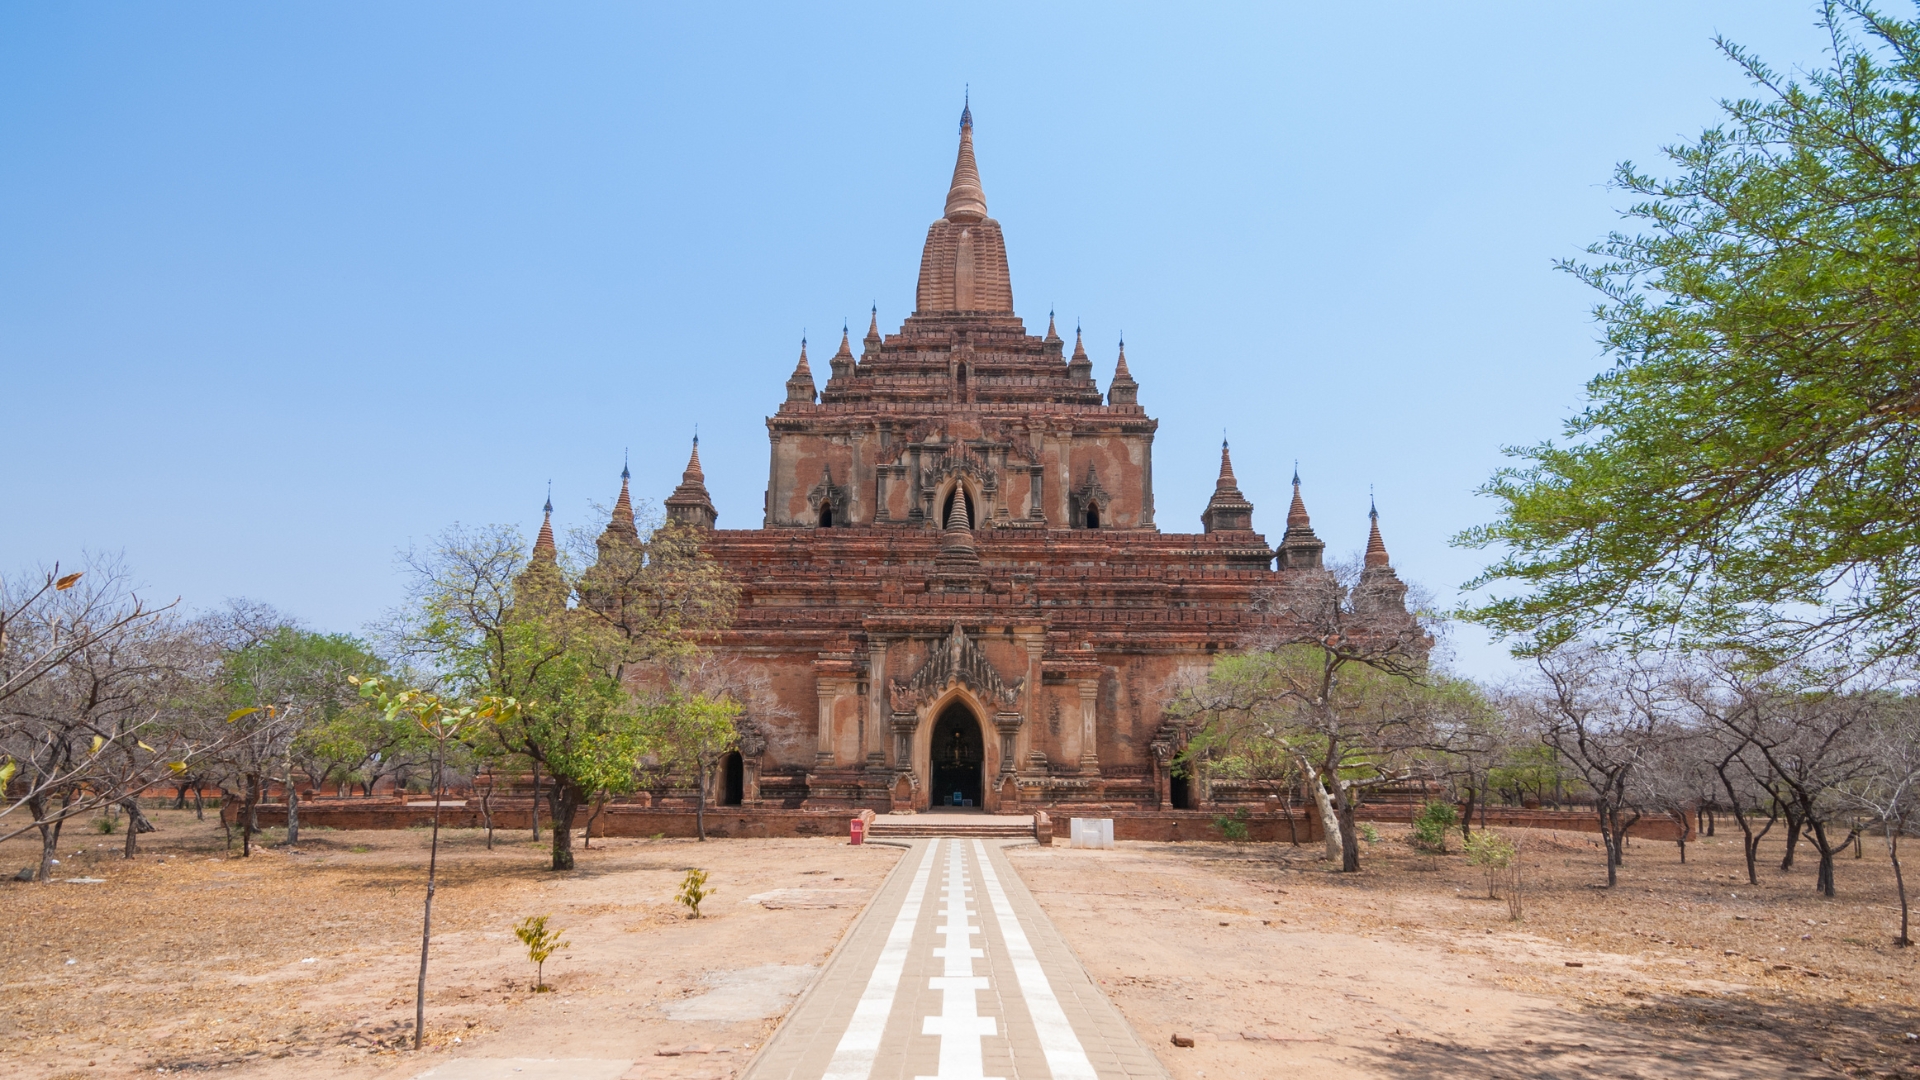 A Pyramidal Structure, Common In Many Bagan Temples